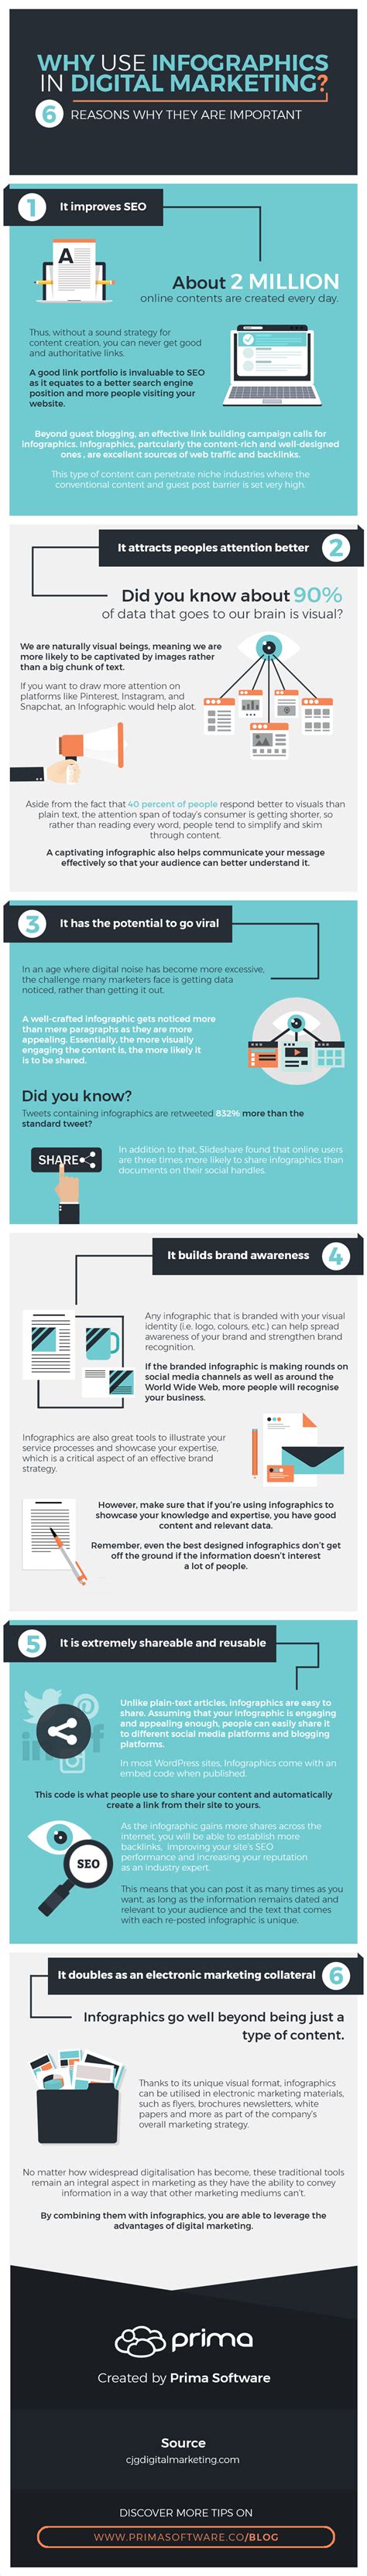 Infographics in Digital Marketing: 6 Reasons Why They Are Important